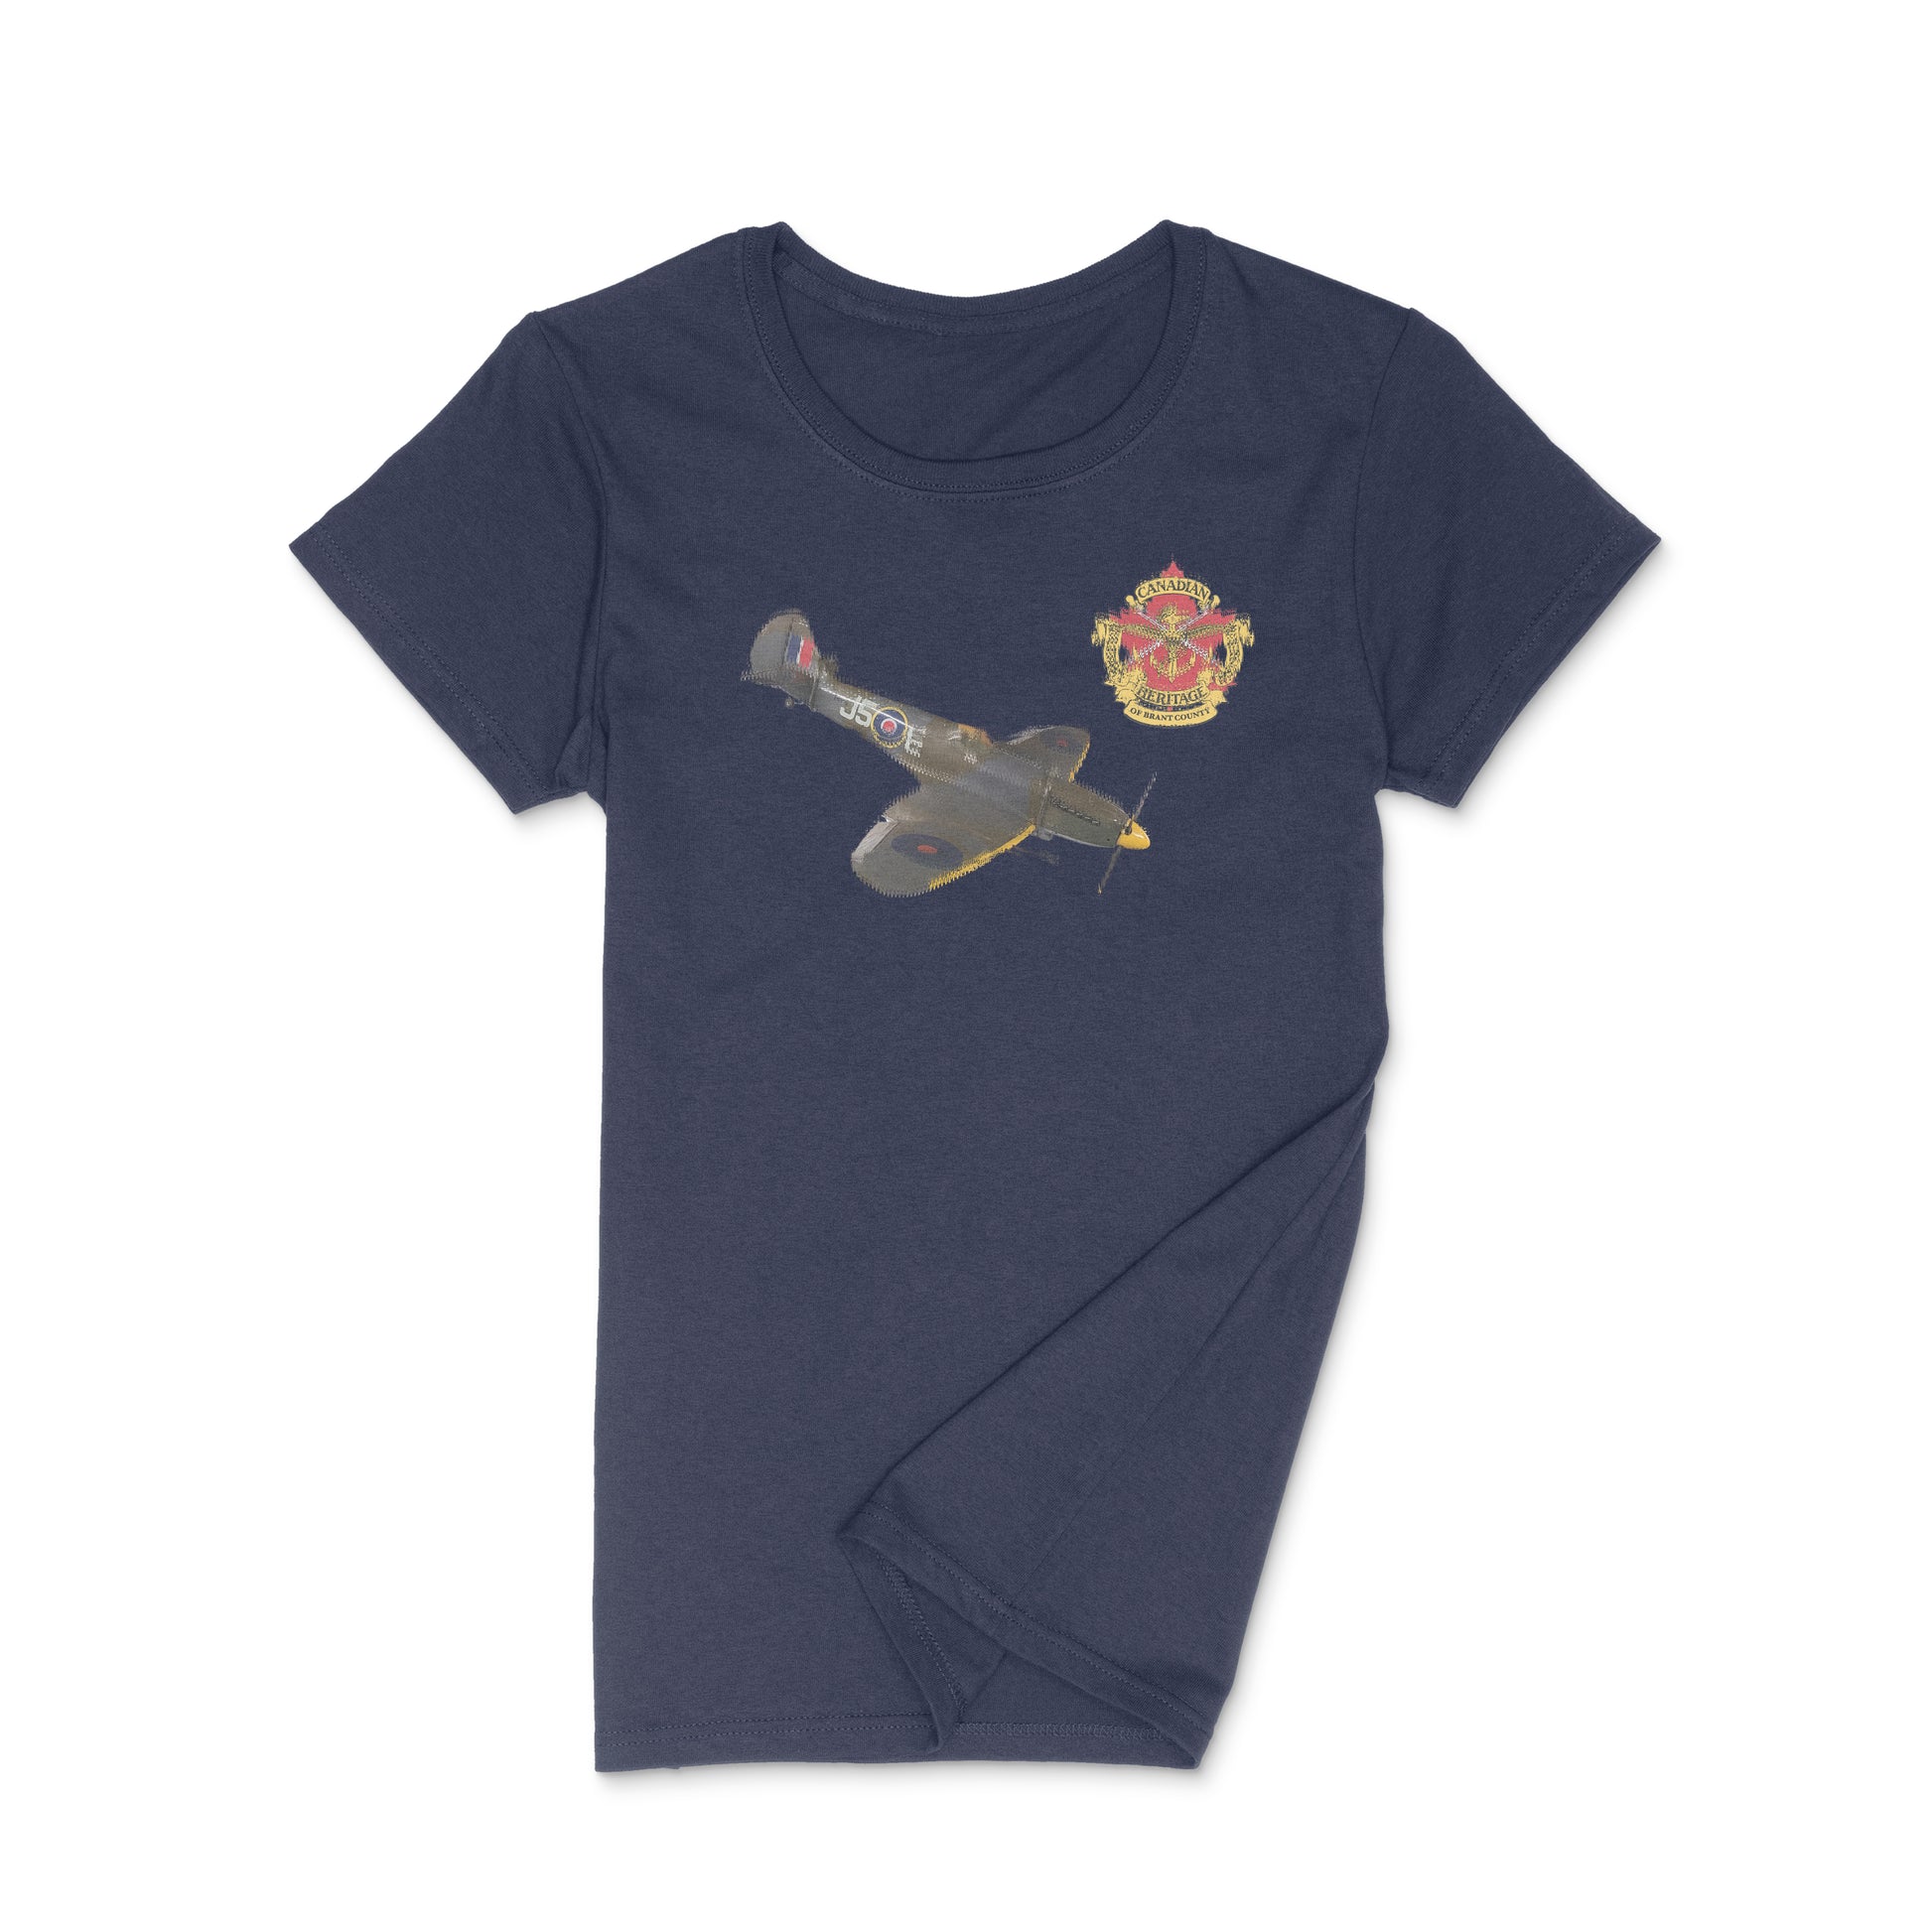 Brantford, Canadian Military Heritage Museum, Fat Dave, Ladies Round Neck, Museum, Spitfire, Navy Blue